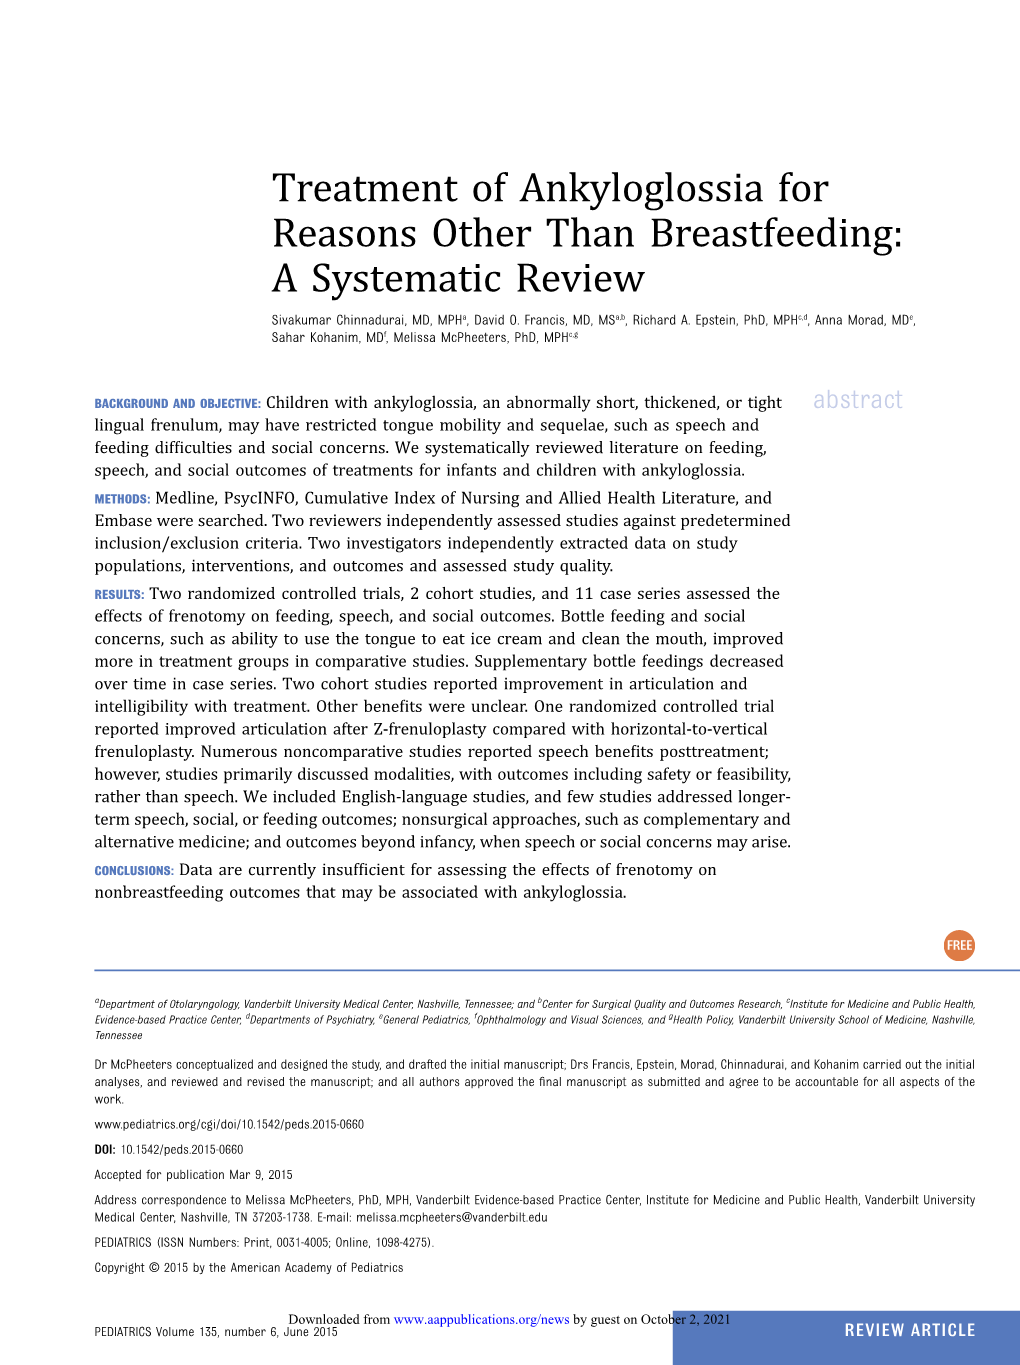 Treatment of Ankyloglossia for Reasons Other Than Breastfeeding: a Systematic Review Sivakumar Chinnadurai, MD, Mpha, David O